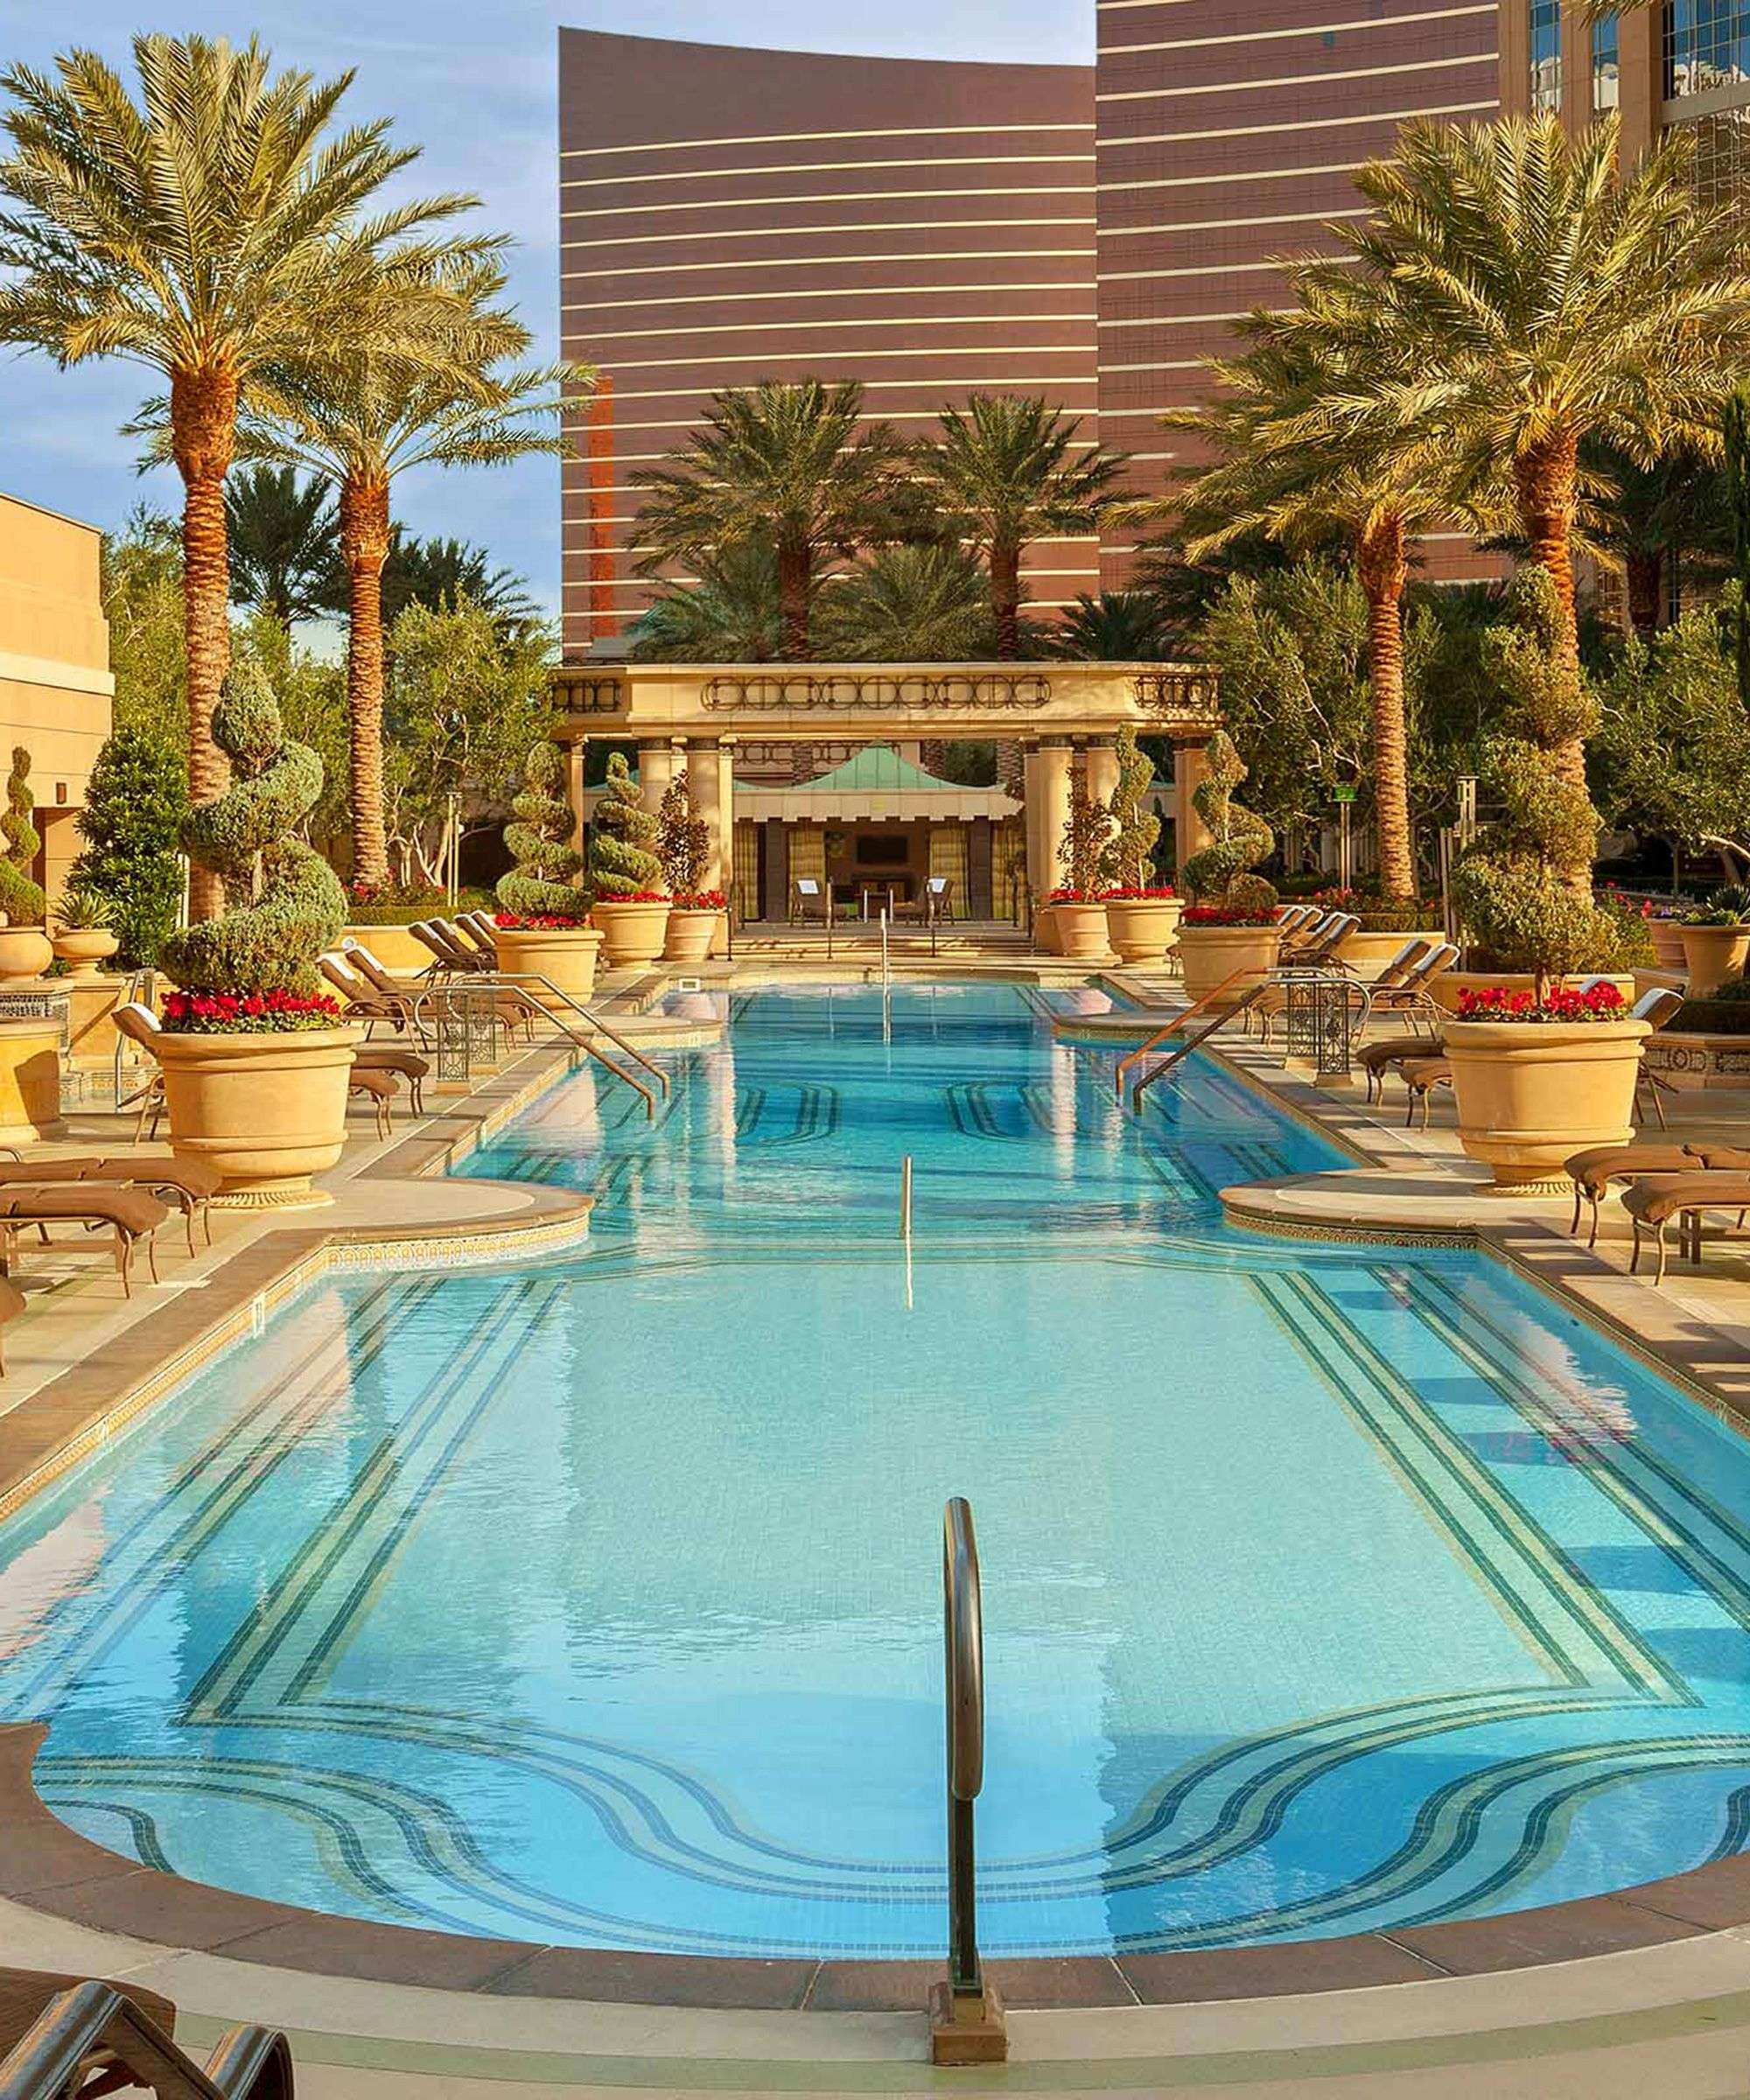 The 7 Most Gorgeous Pools Las Vegas Has To Offer